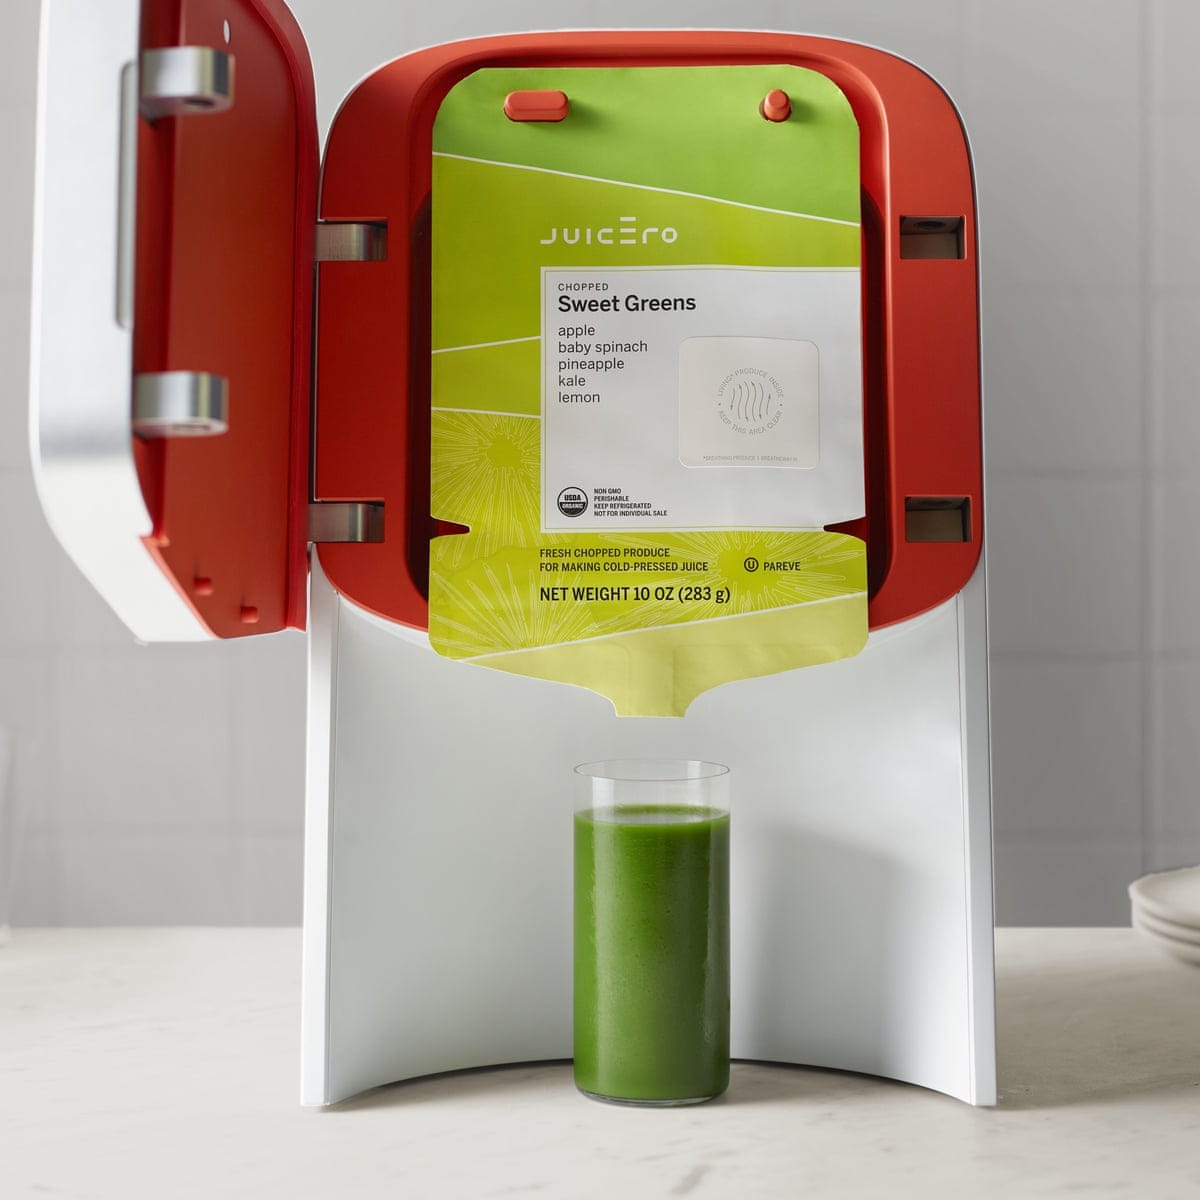 Squeezed out: widely mocked startup Juicero is shutting down | Silicon  Valley | The Guardian